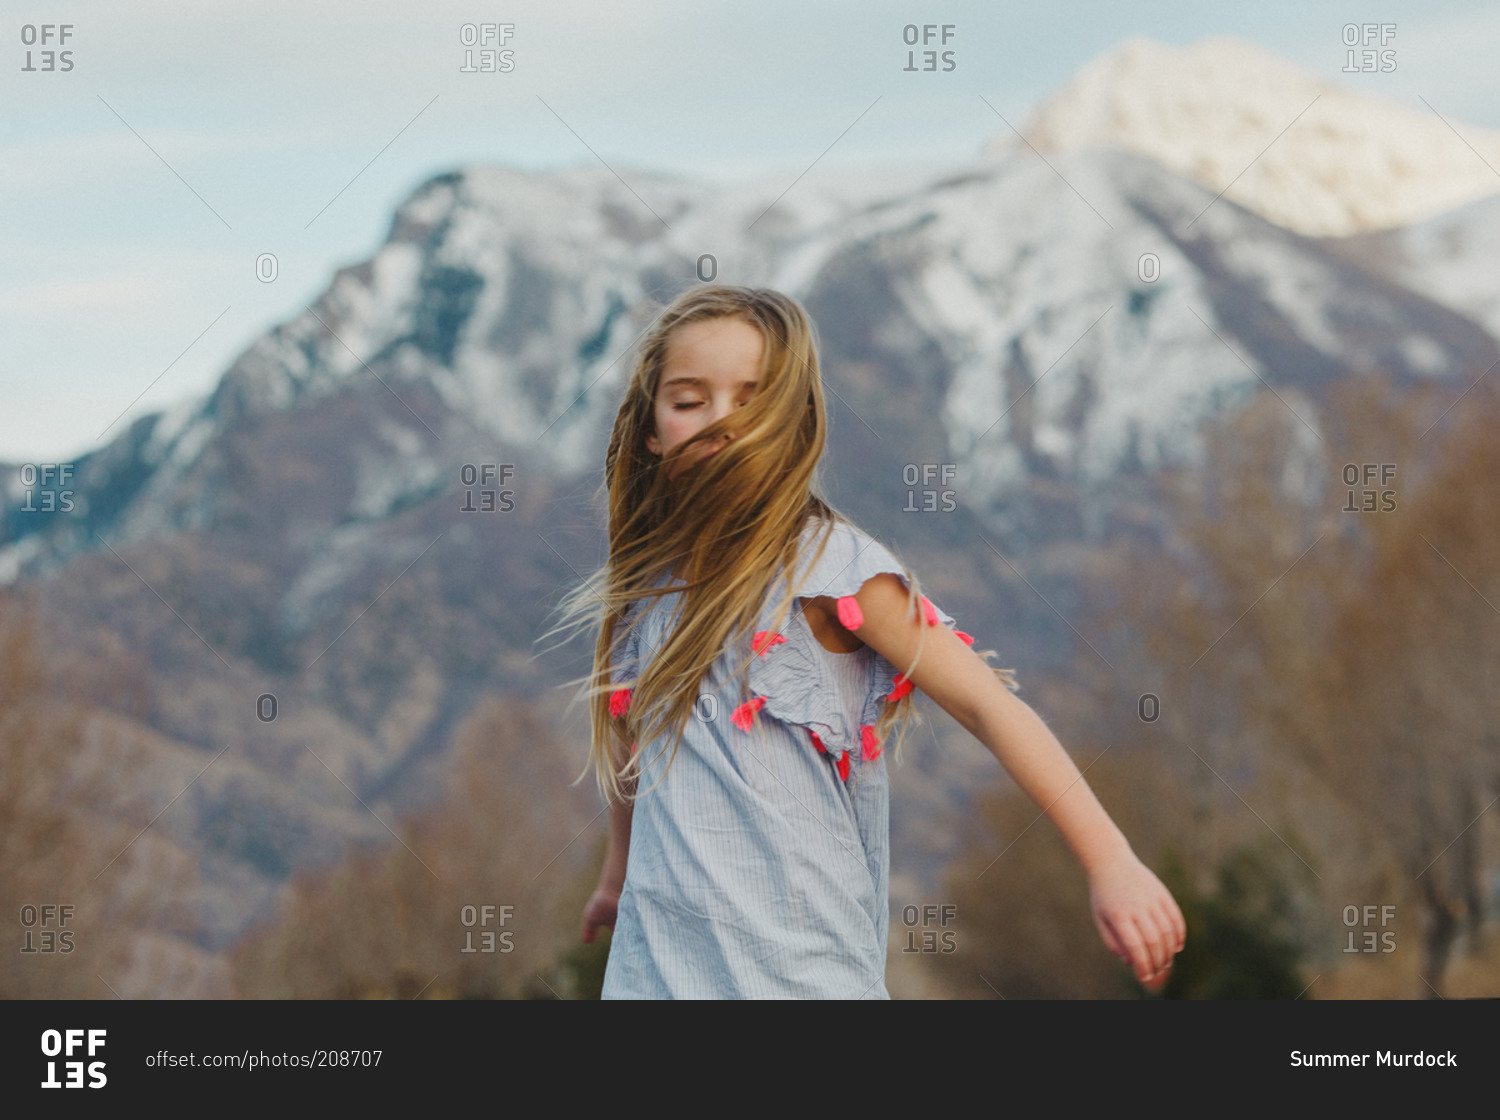 A little girl spins around in front of snowcapped mountains